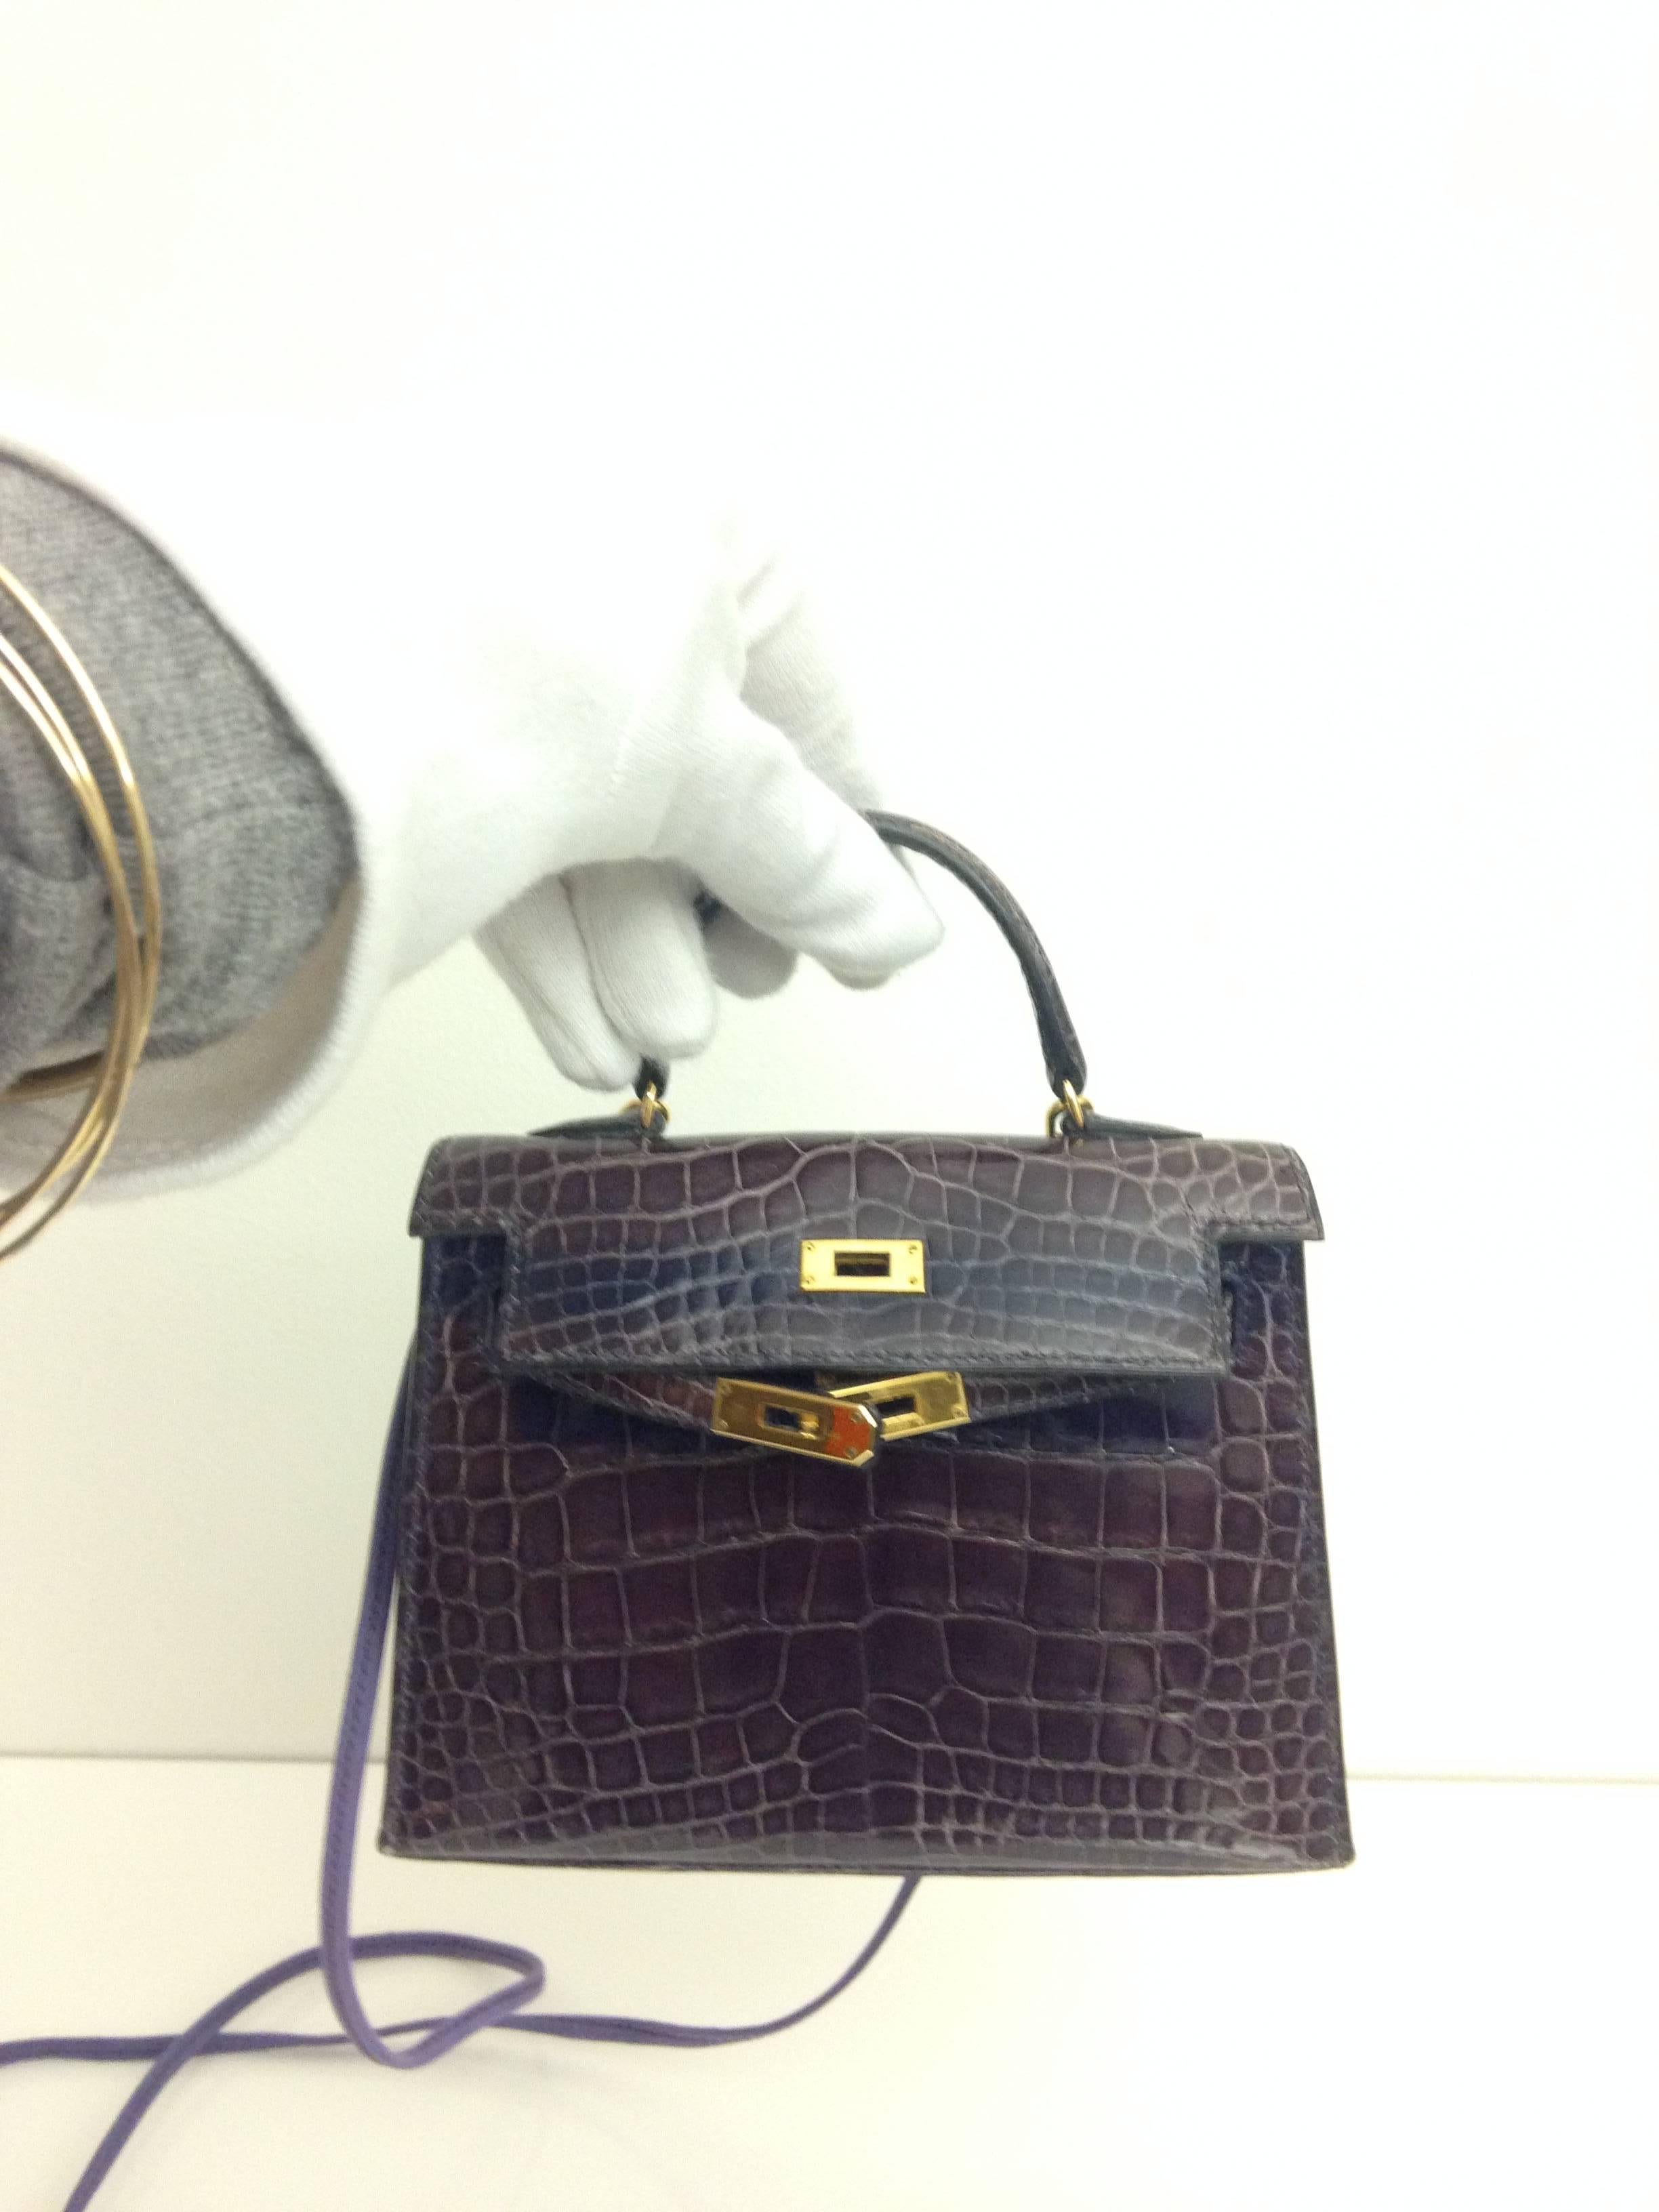 Hermes, Kelly bag, Size 15, Color Prune, Leather Shiny Crocodile Alligator, Gold Hardware.

This bag comes with a dustbag and strap, this ia an extremely rare bag. 